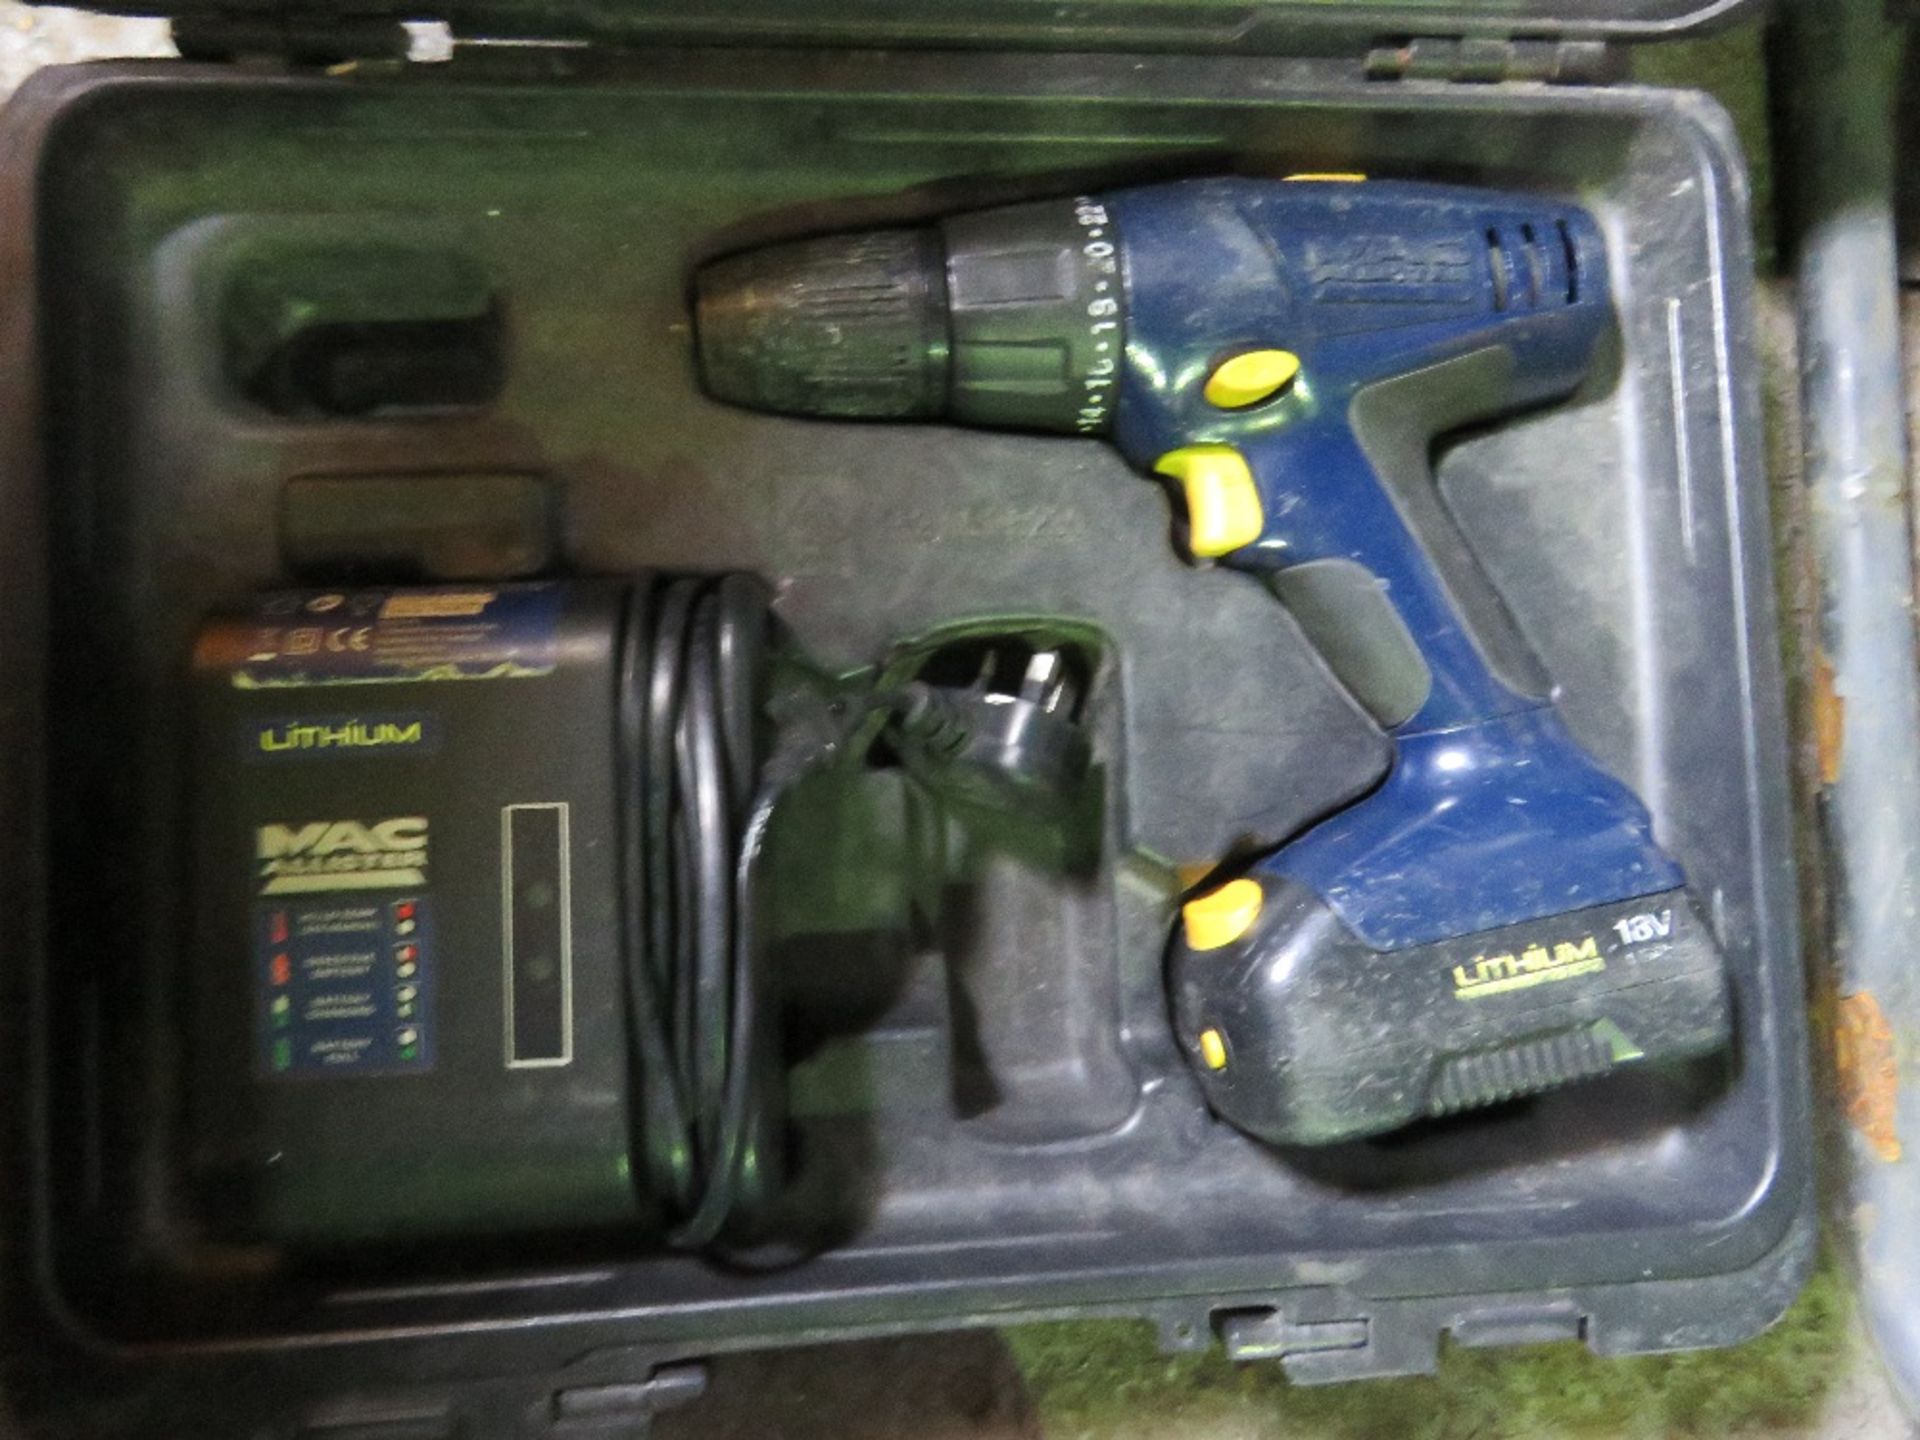 3 X BATTERY DRILLS IN CASES. - Image 3 of 3